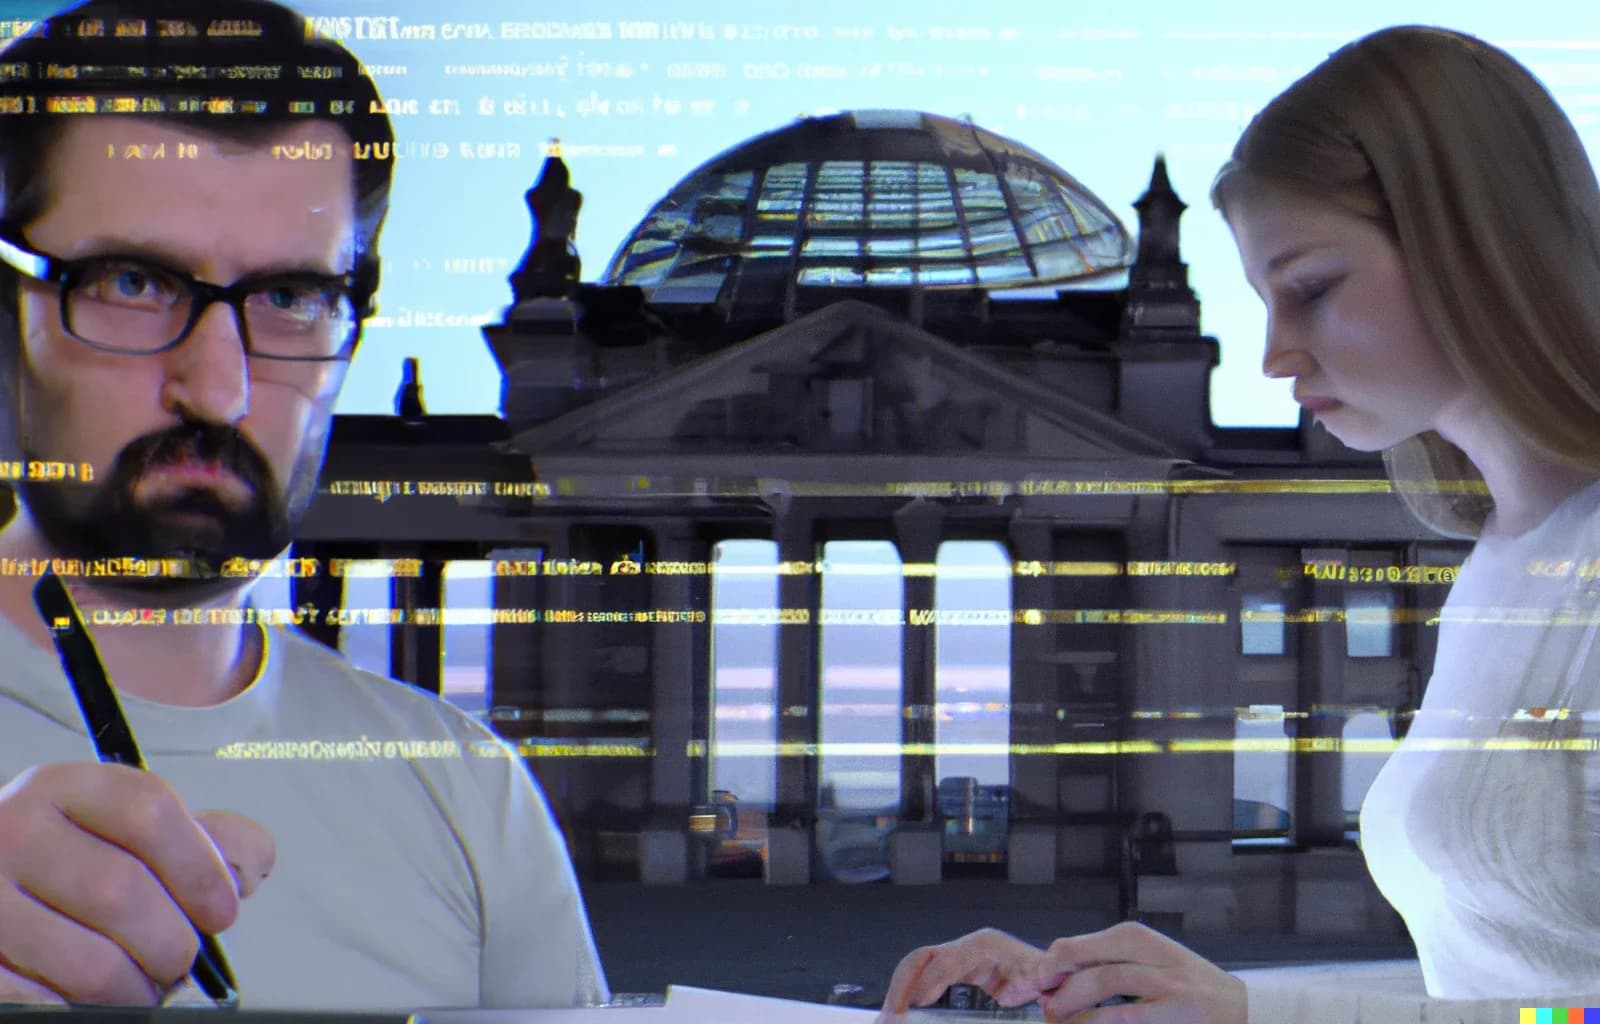 Software engineers writing code, with the German Bundestag in the background